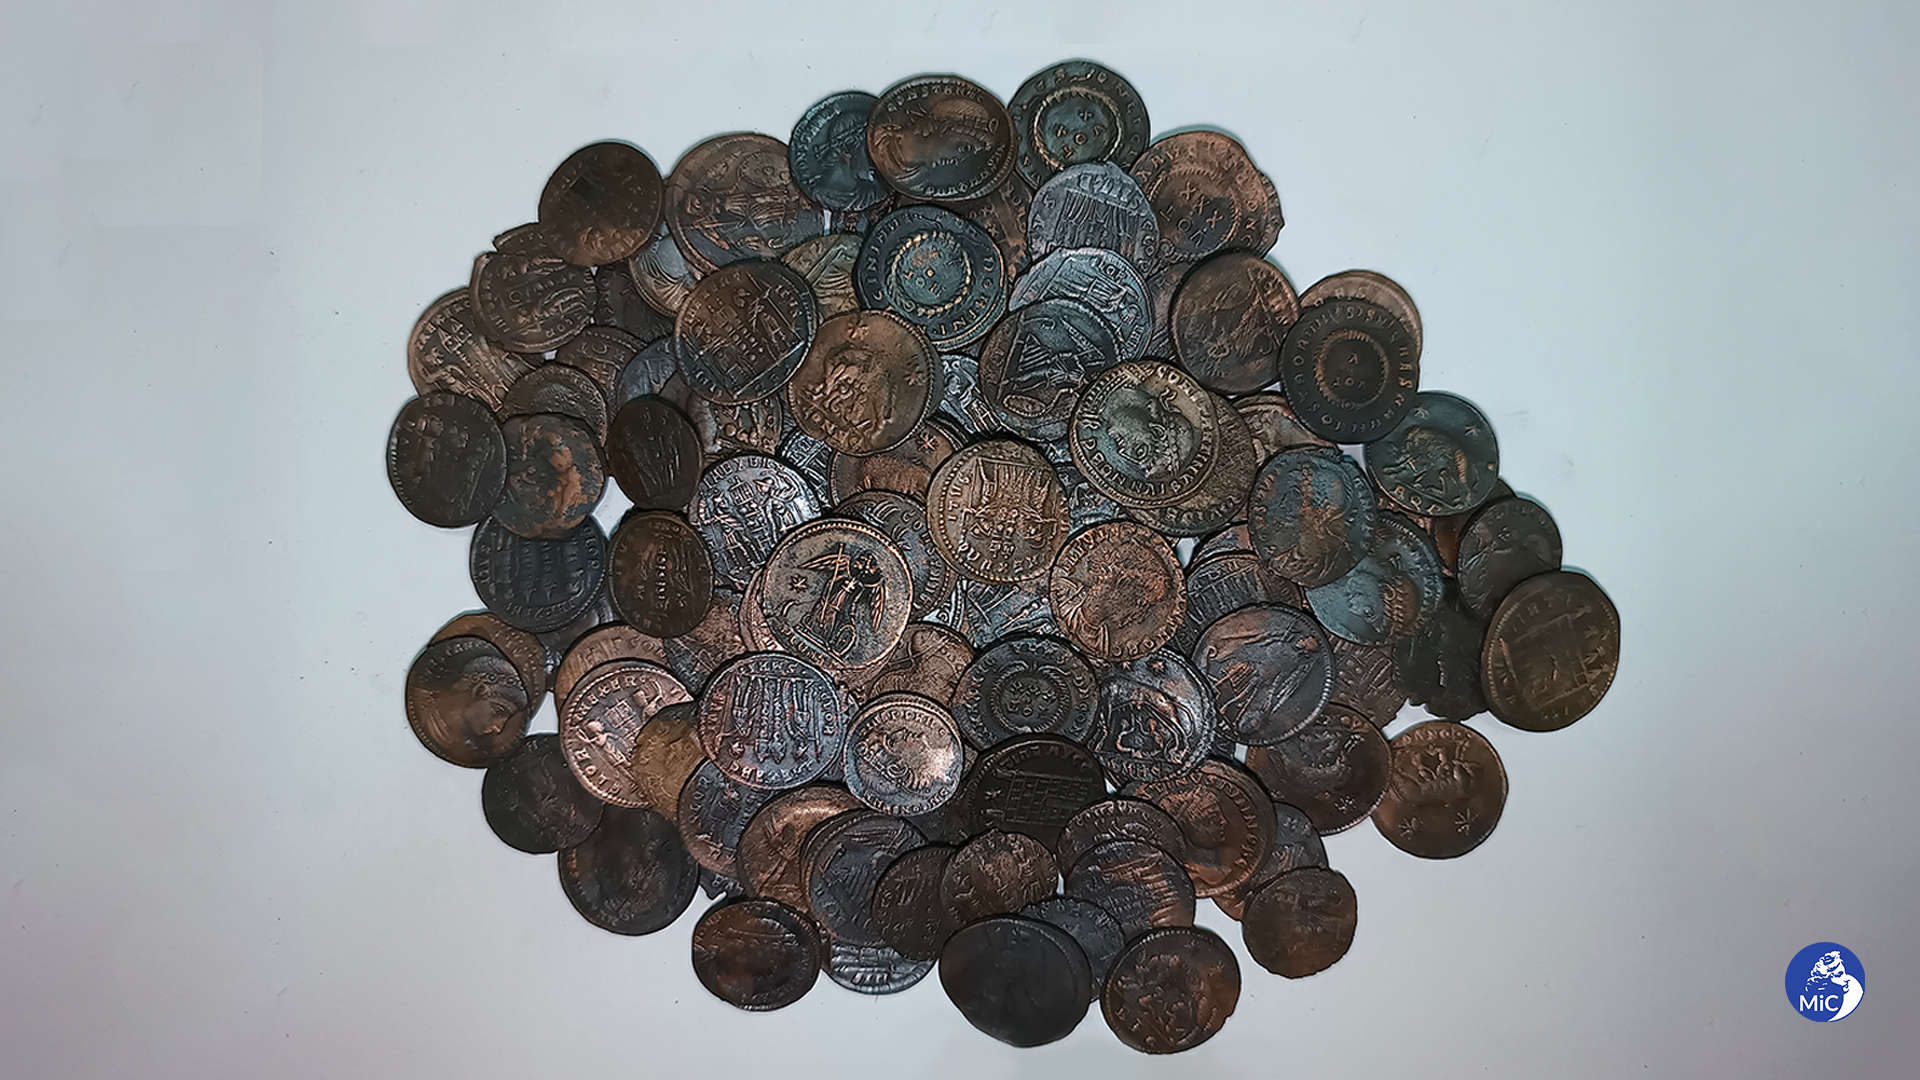 Extraordinary discovery in Sardinia: huge of well-preserved trove coins treasure Roman